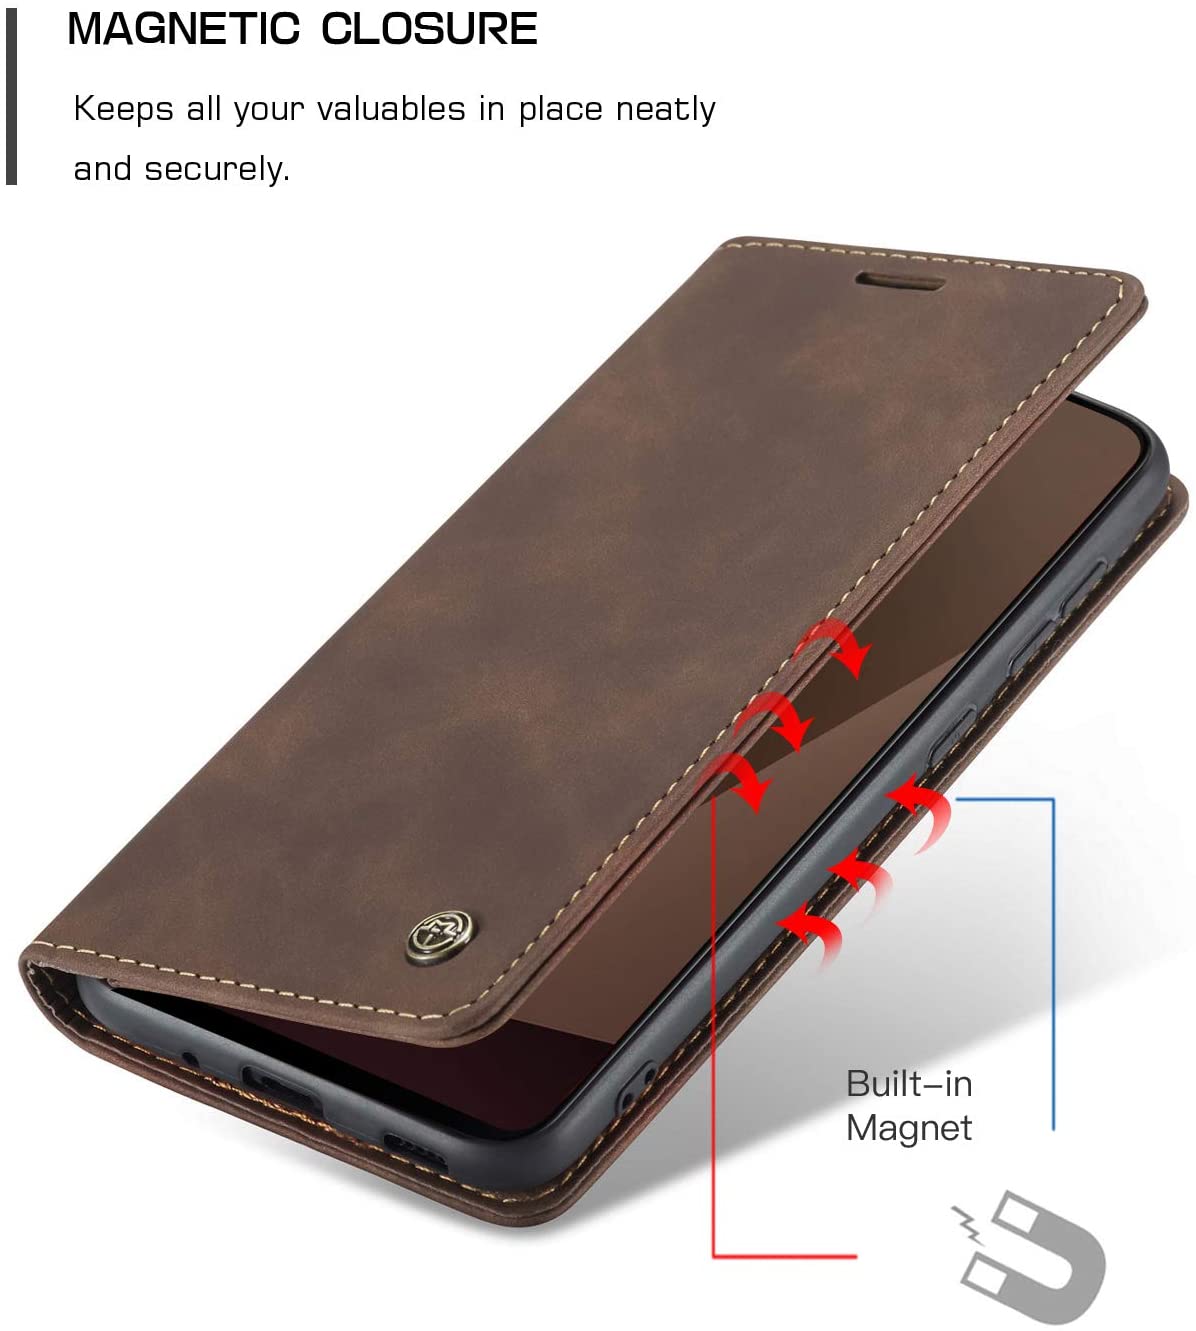 Excelsior Premium Leather Wallet flip Cover Case For Oneplus 8T